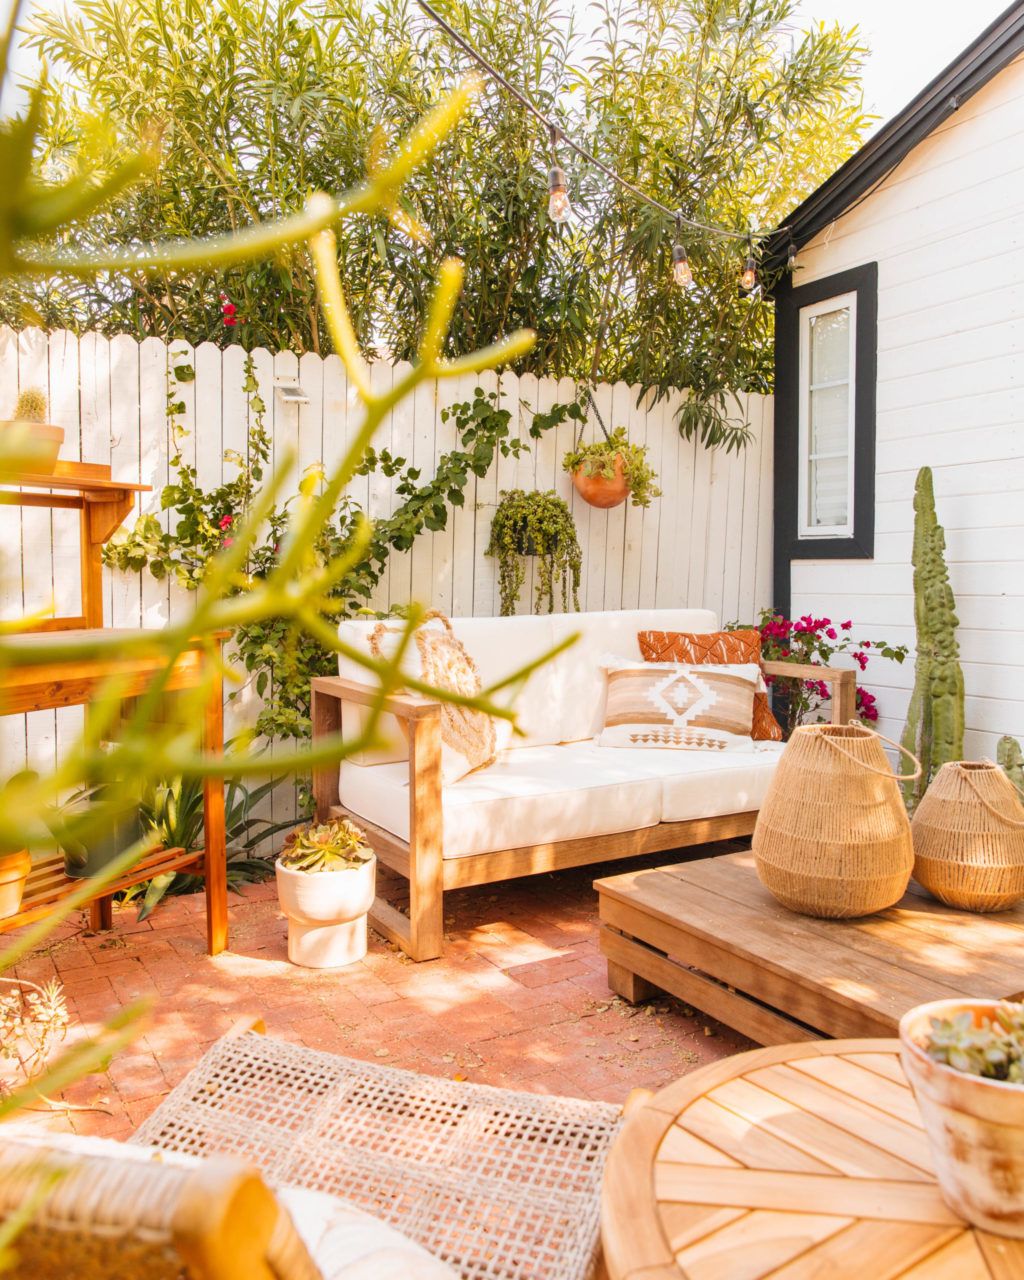 Create Your Favorite Patio to Bring An Outdoor Summer Vibe